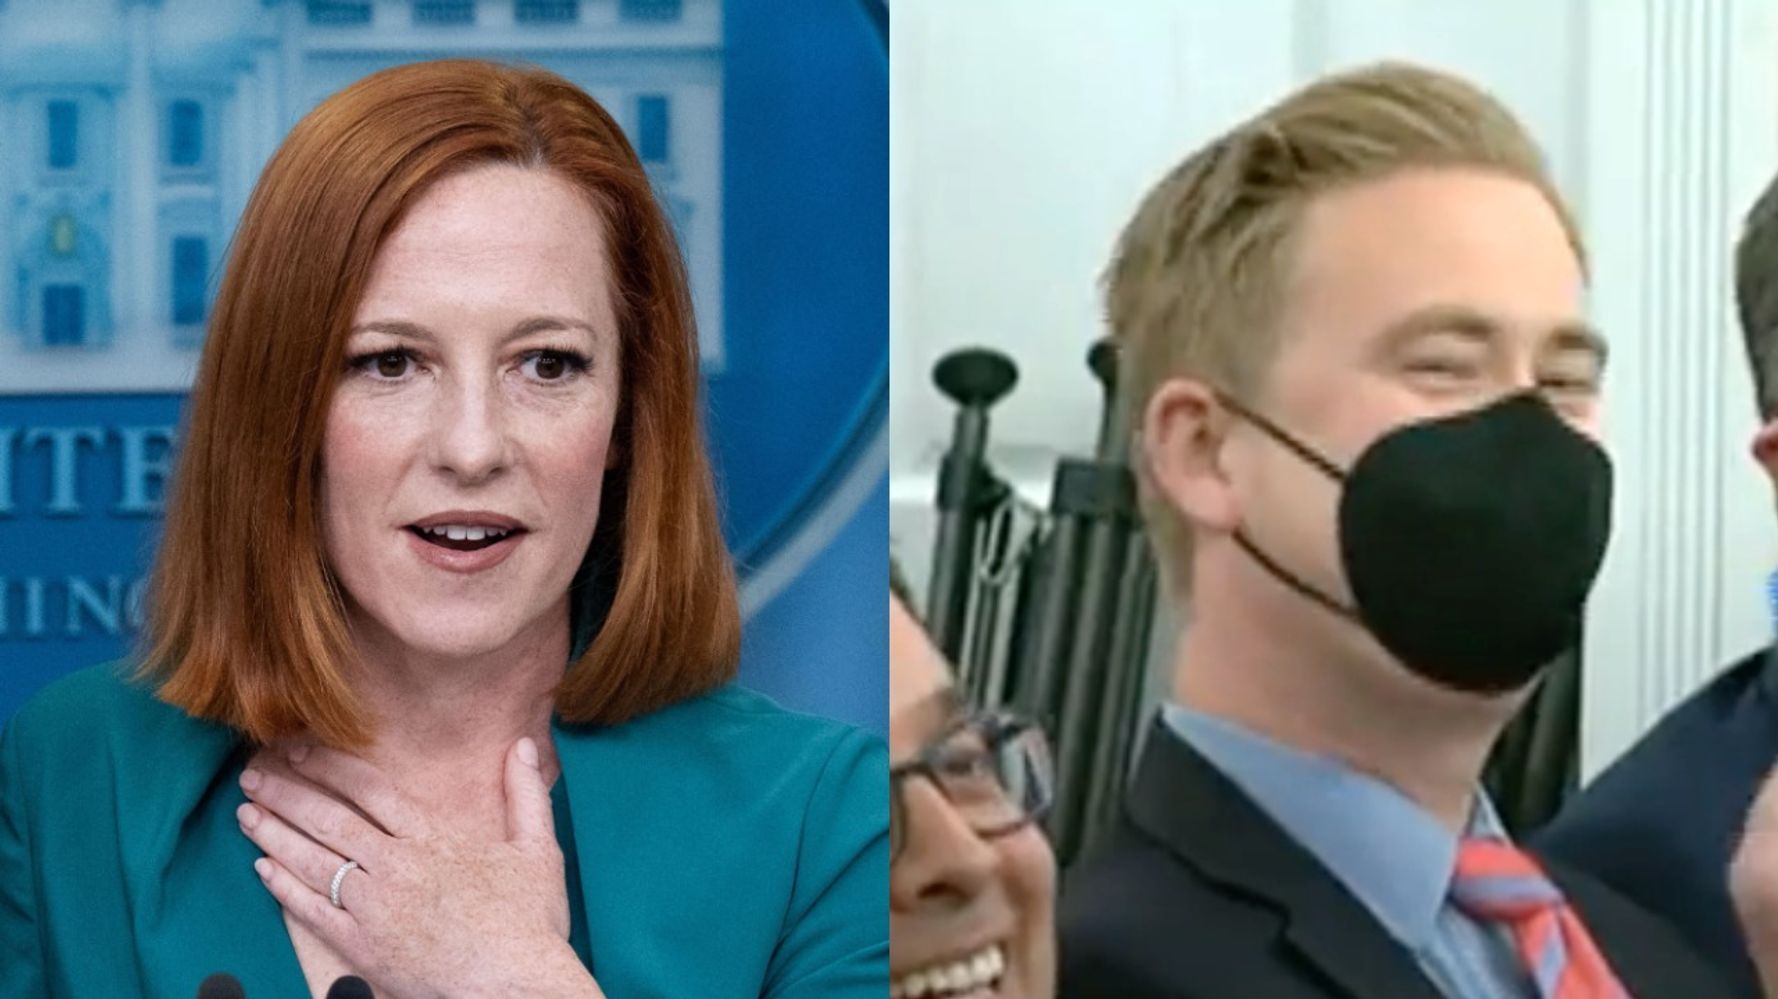 Peter Doocy And Jen Psaki Exchange Rare Amicable Moment: ‘Sorry To See You Go’